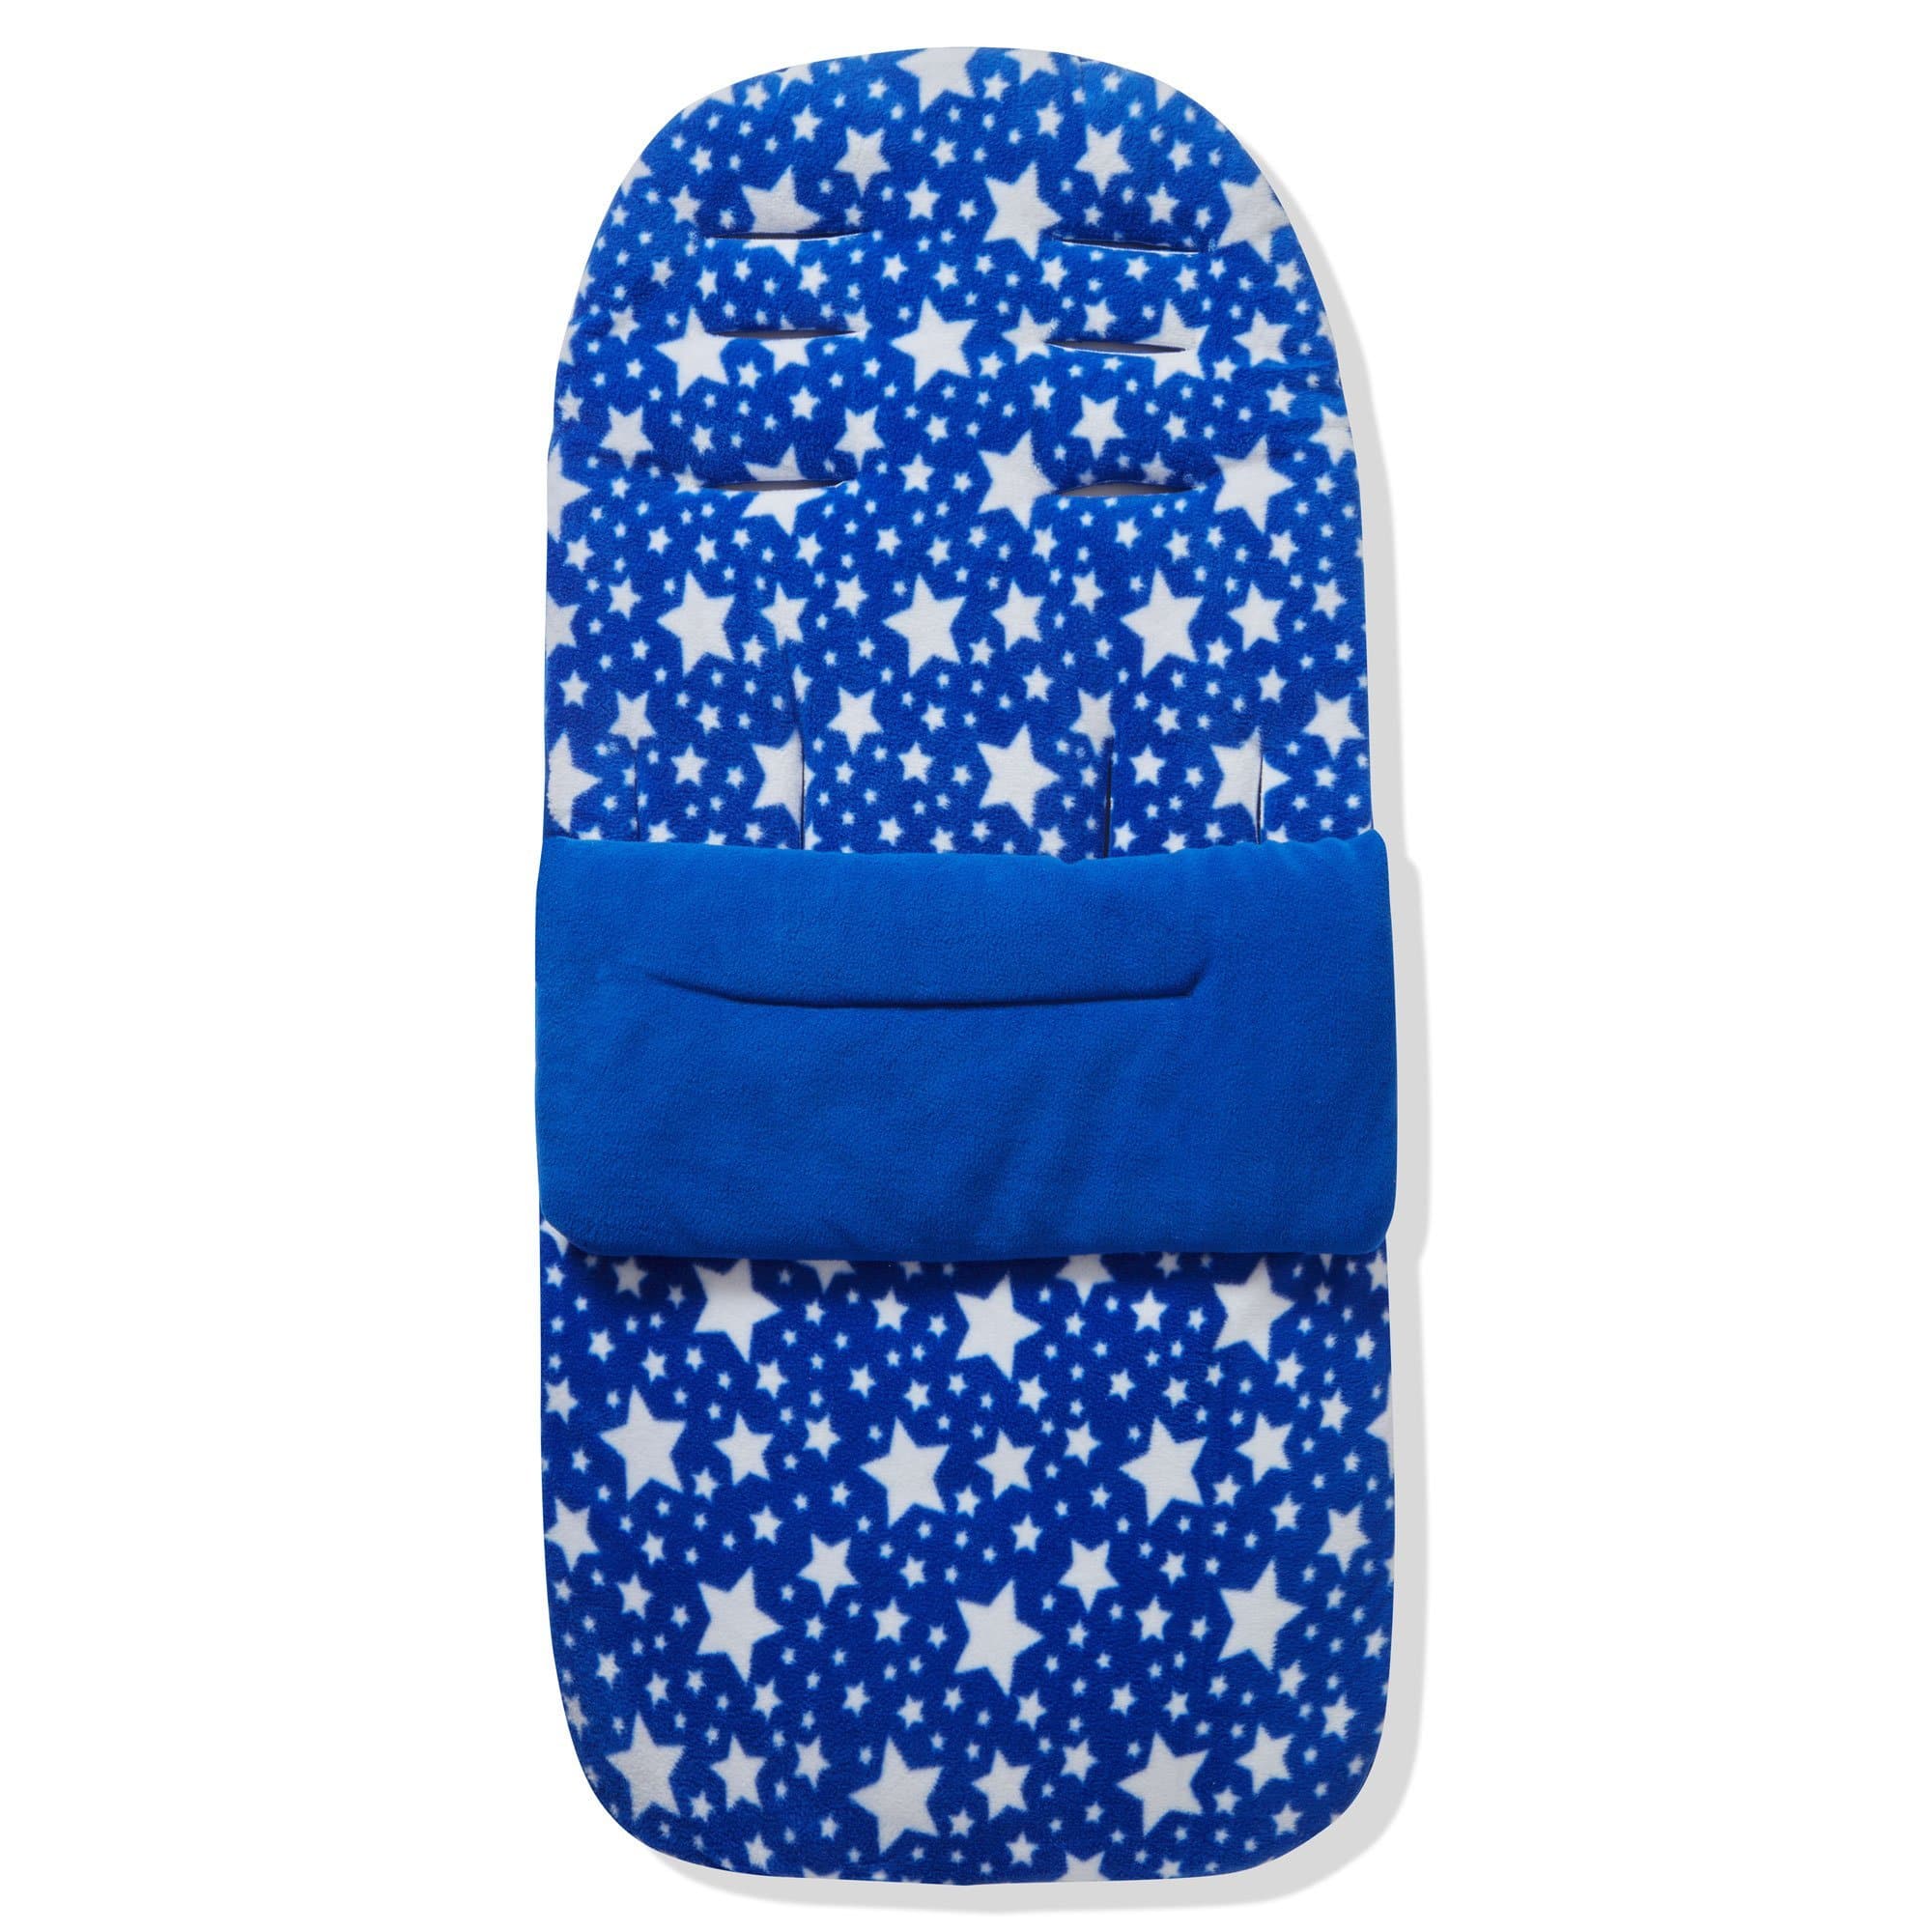 Fleece Footmuff / Cosy Toes Compatible With Combi - Blue Star / Fits All Models | For Your Little One